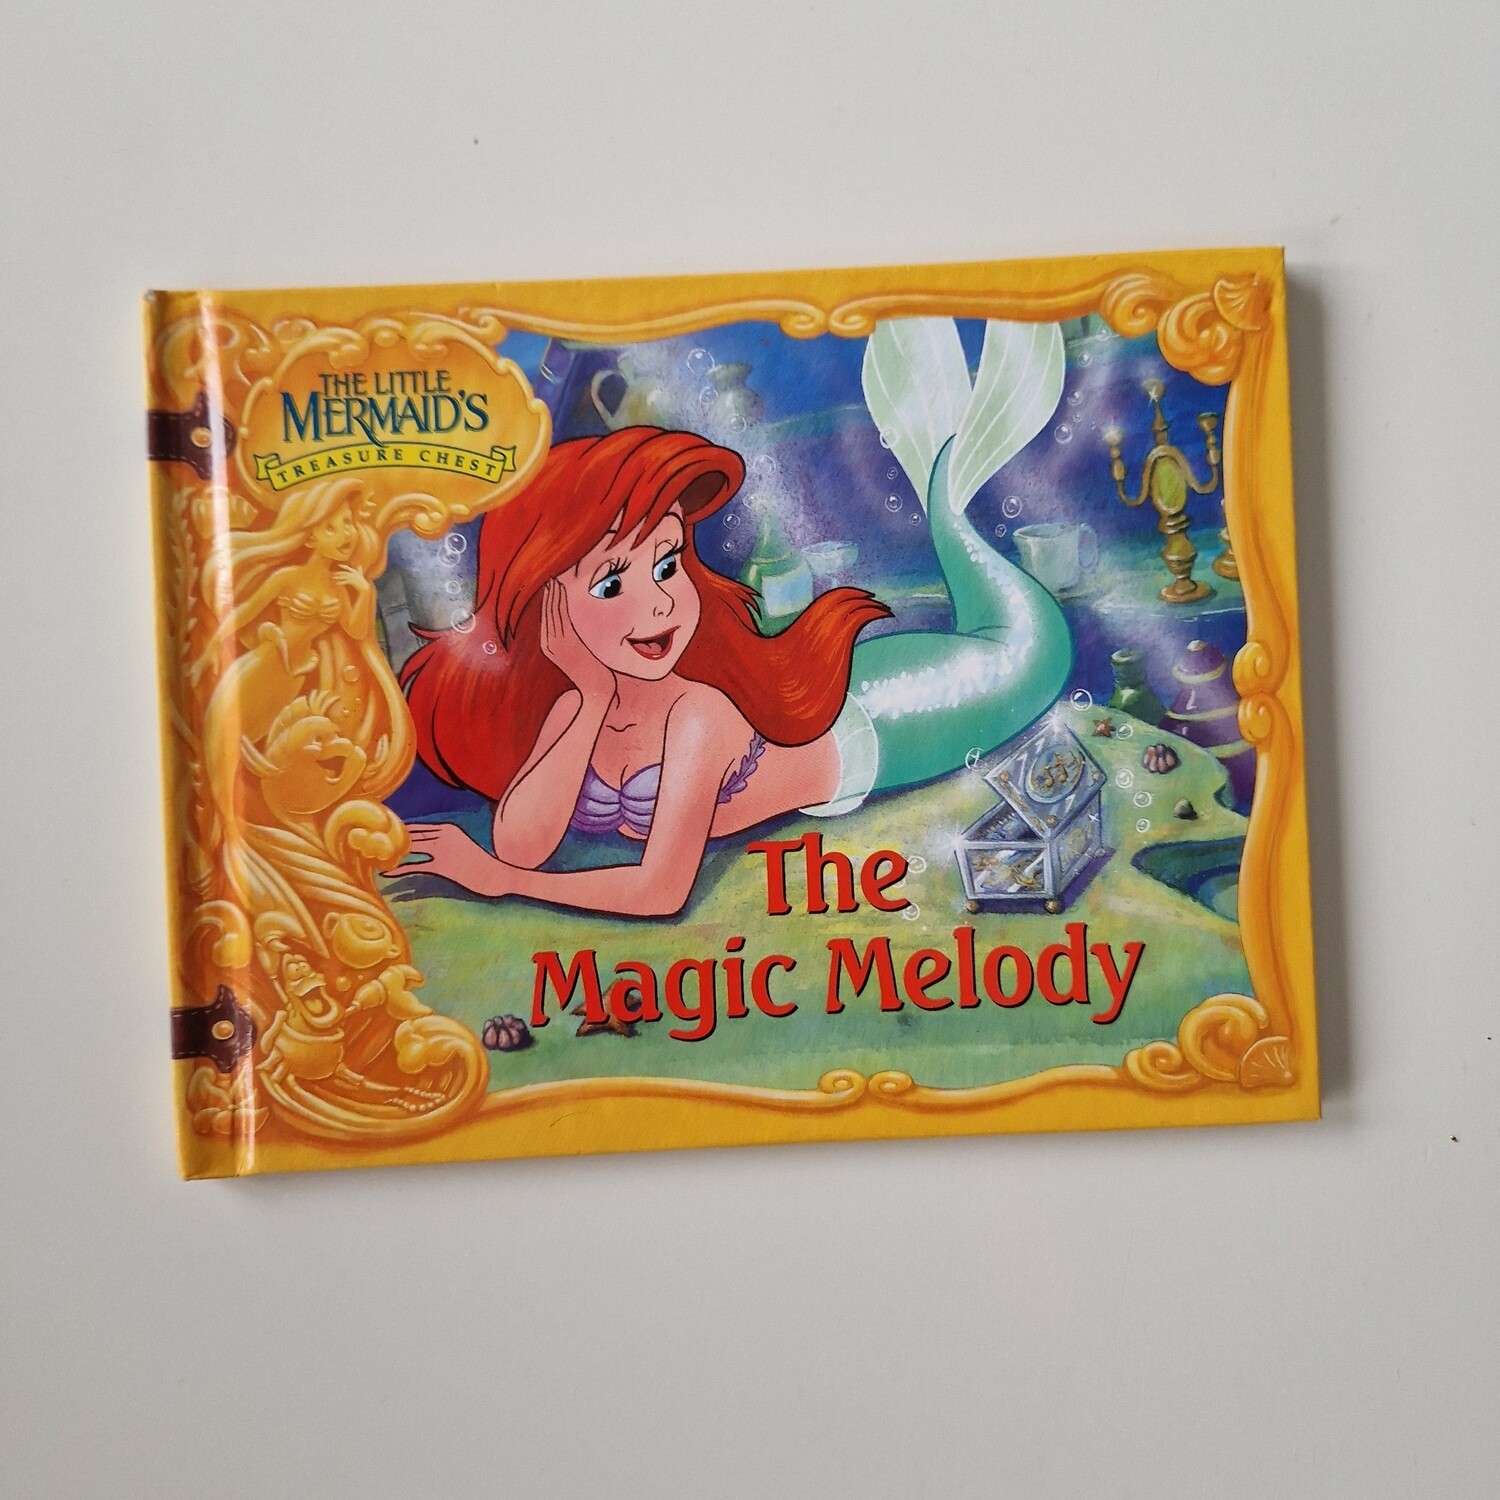 The Little Mermaid - The Magic Melody